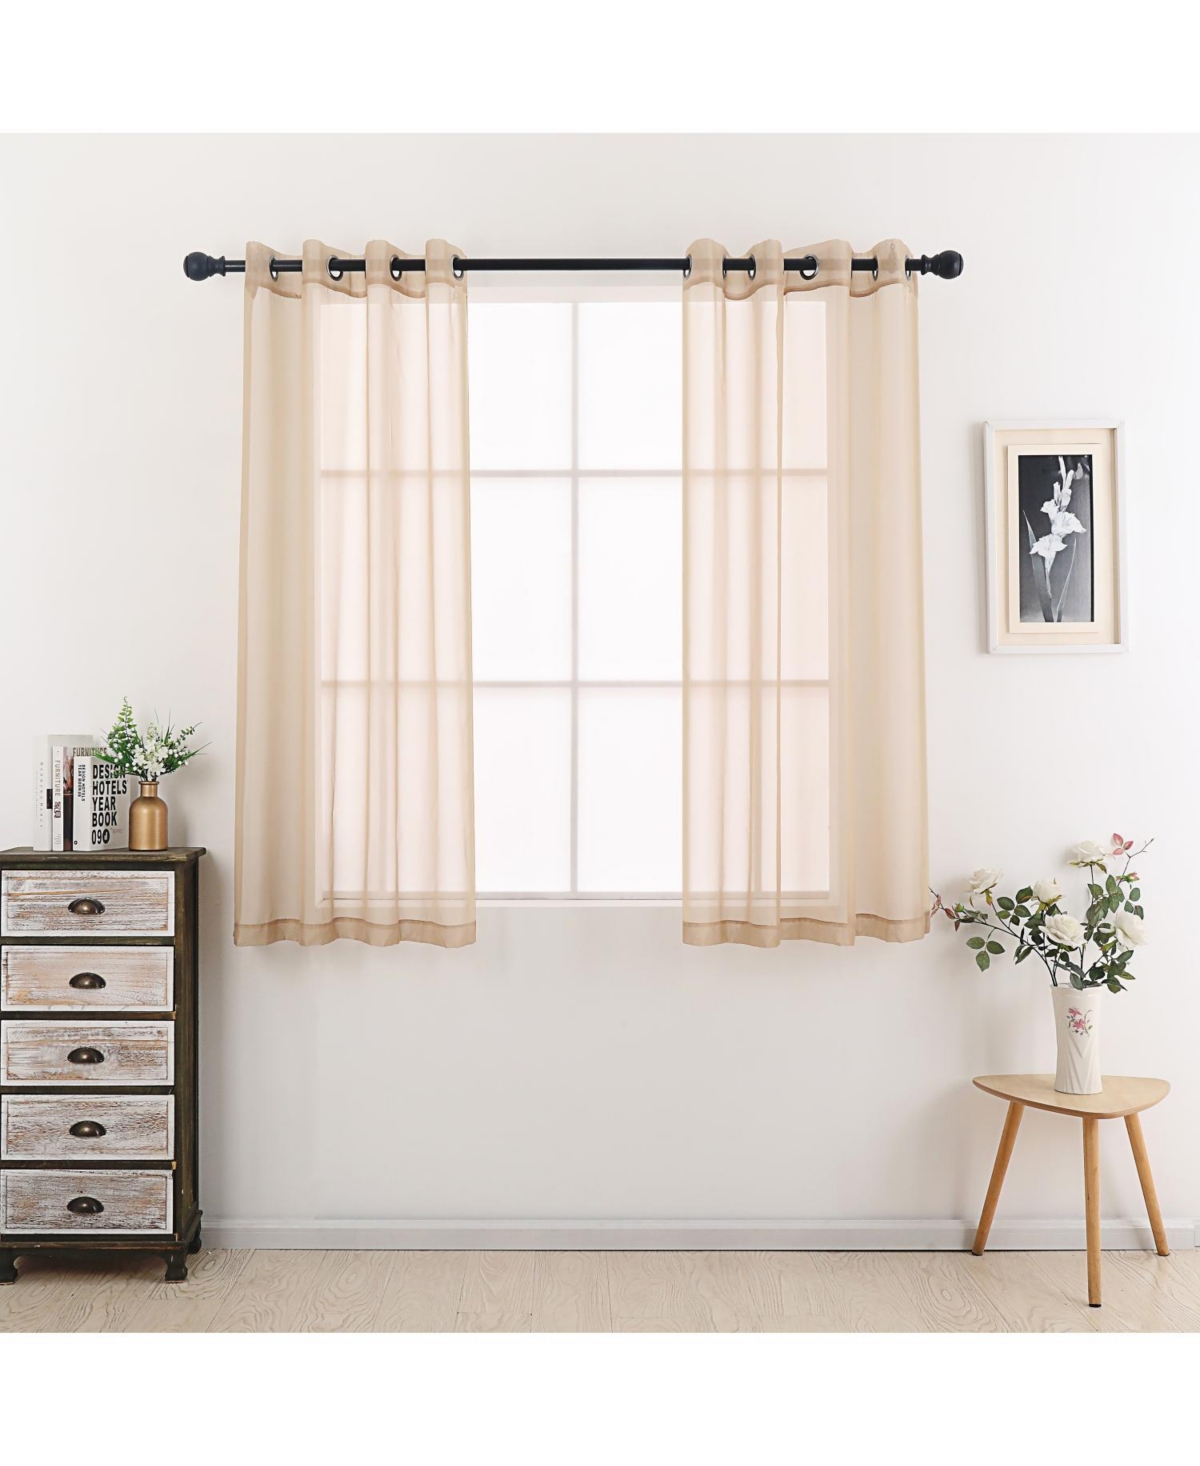 Montauk Accents 2 Piece Grommet Top Summery Sheer Voile Window Curtain Panels For Small/Short Windows - Tan